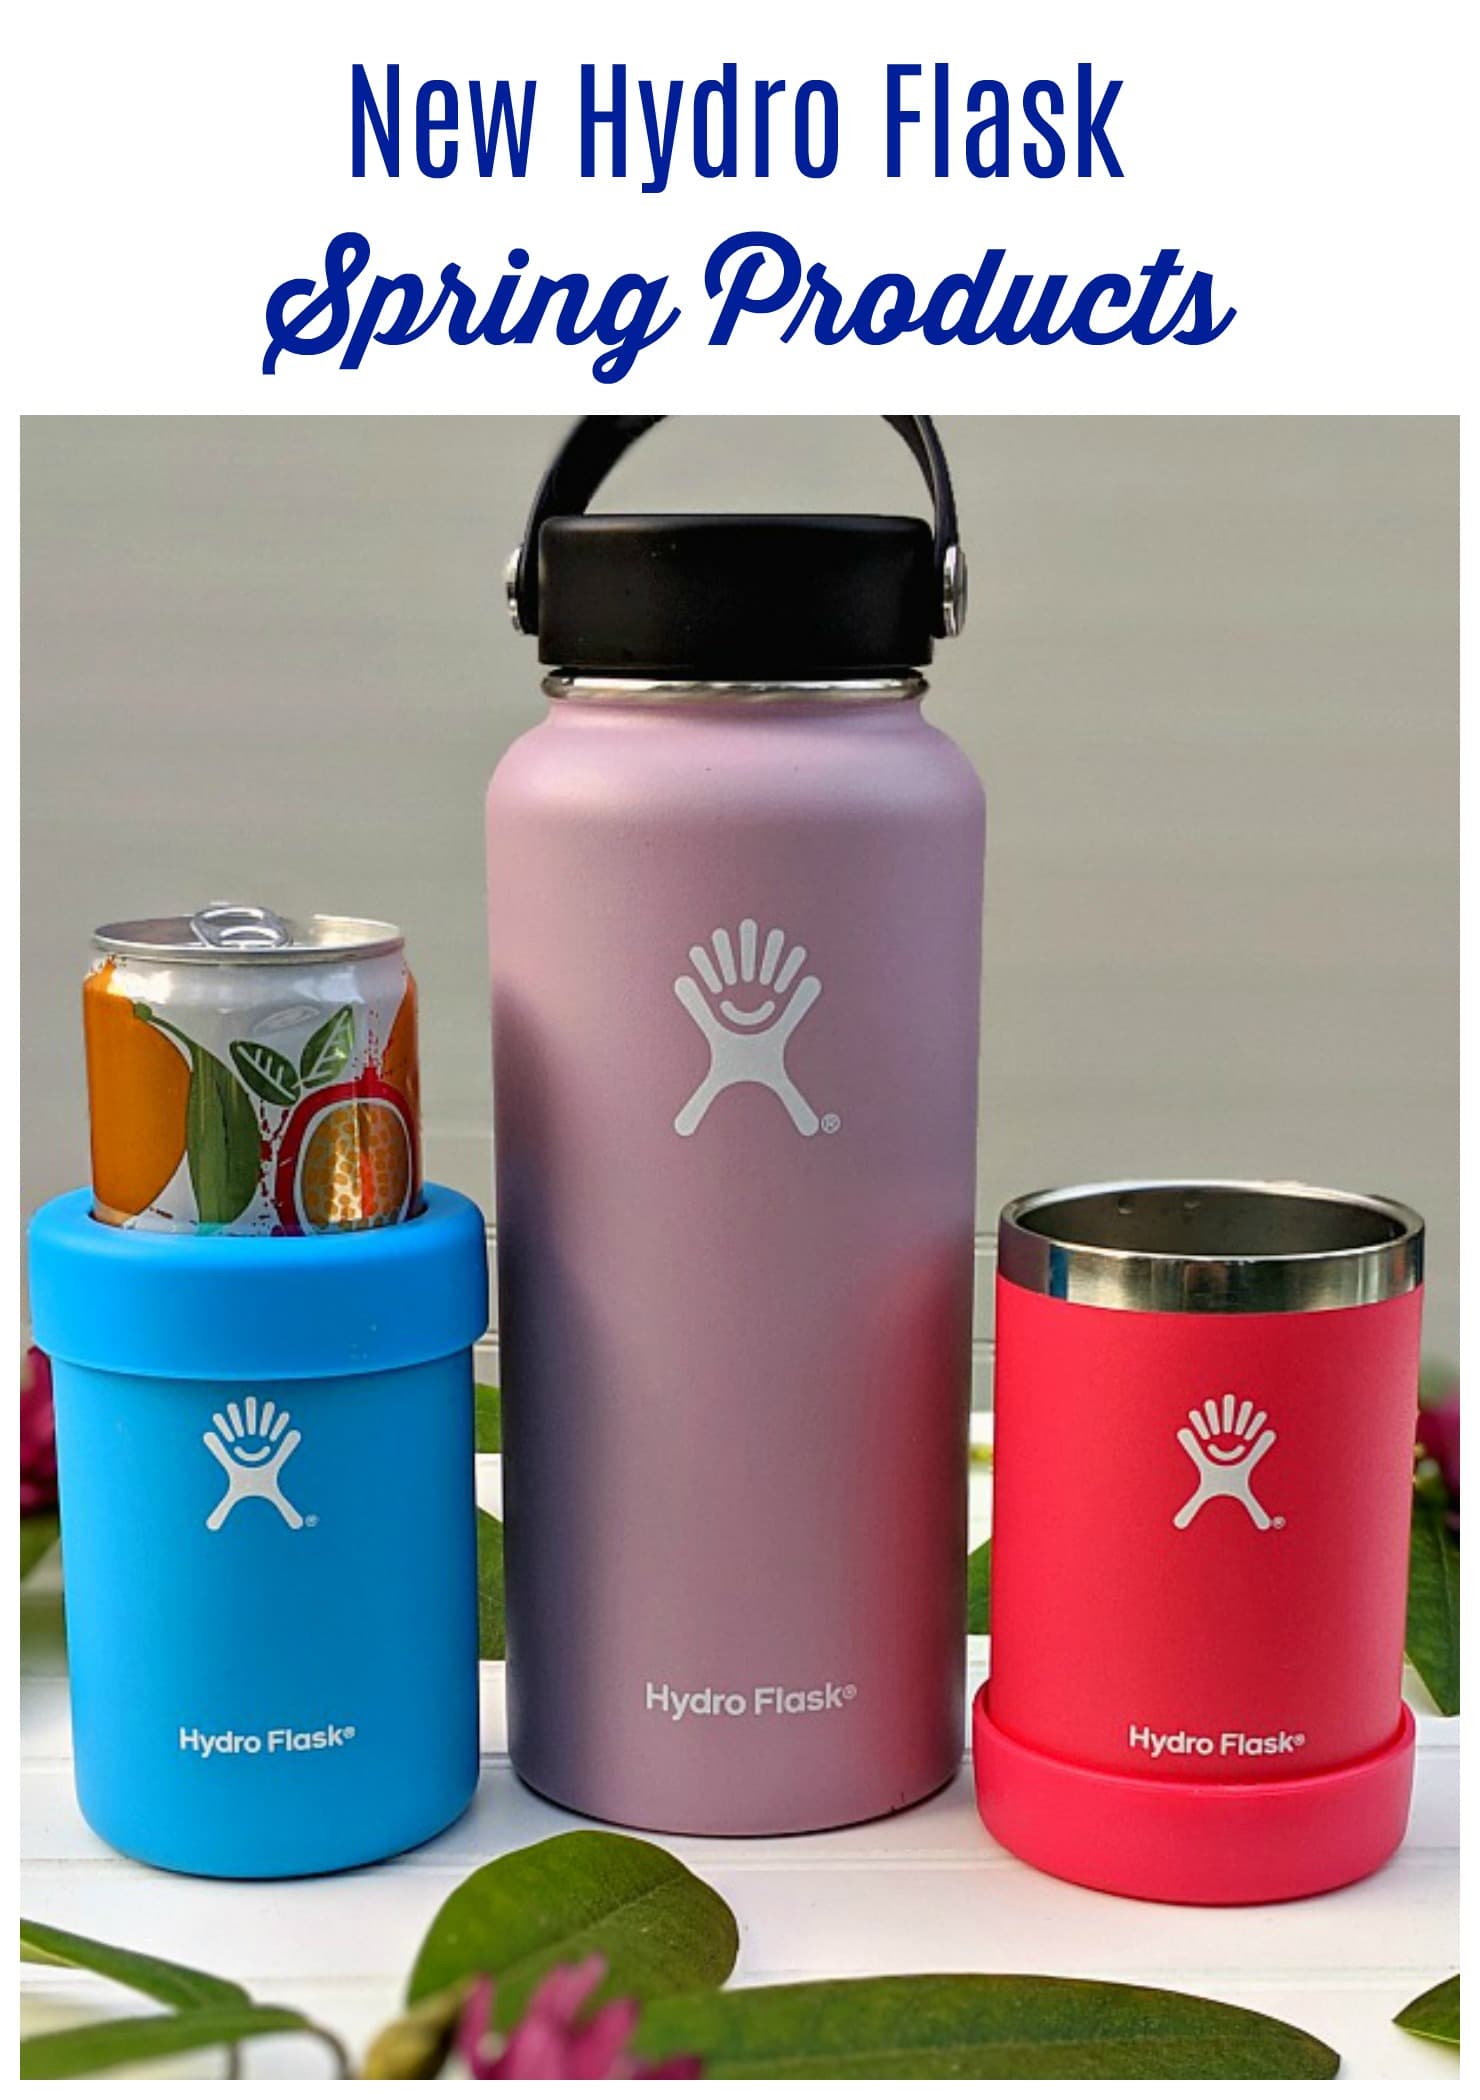 hydro flask colorful